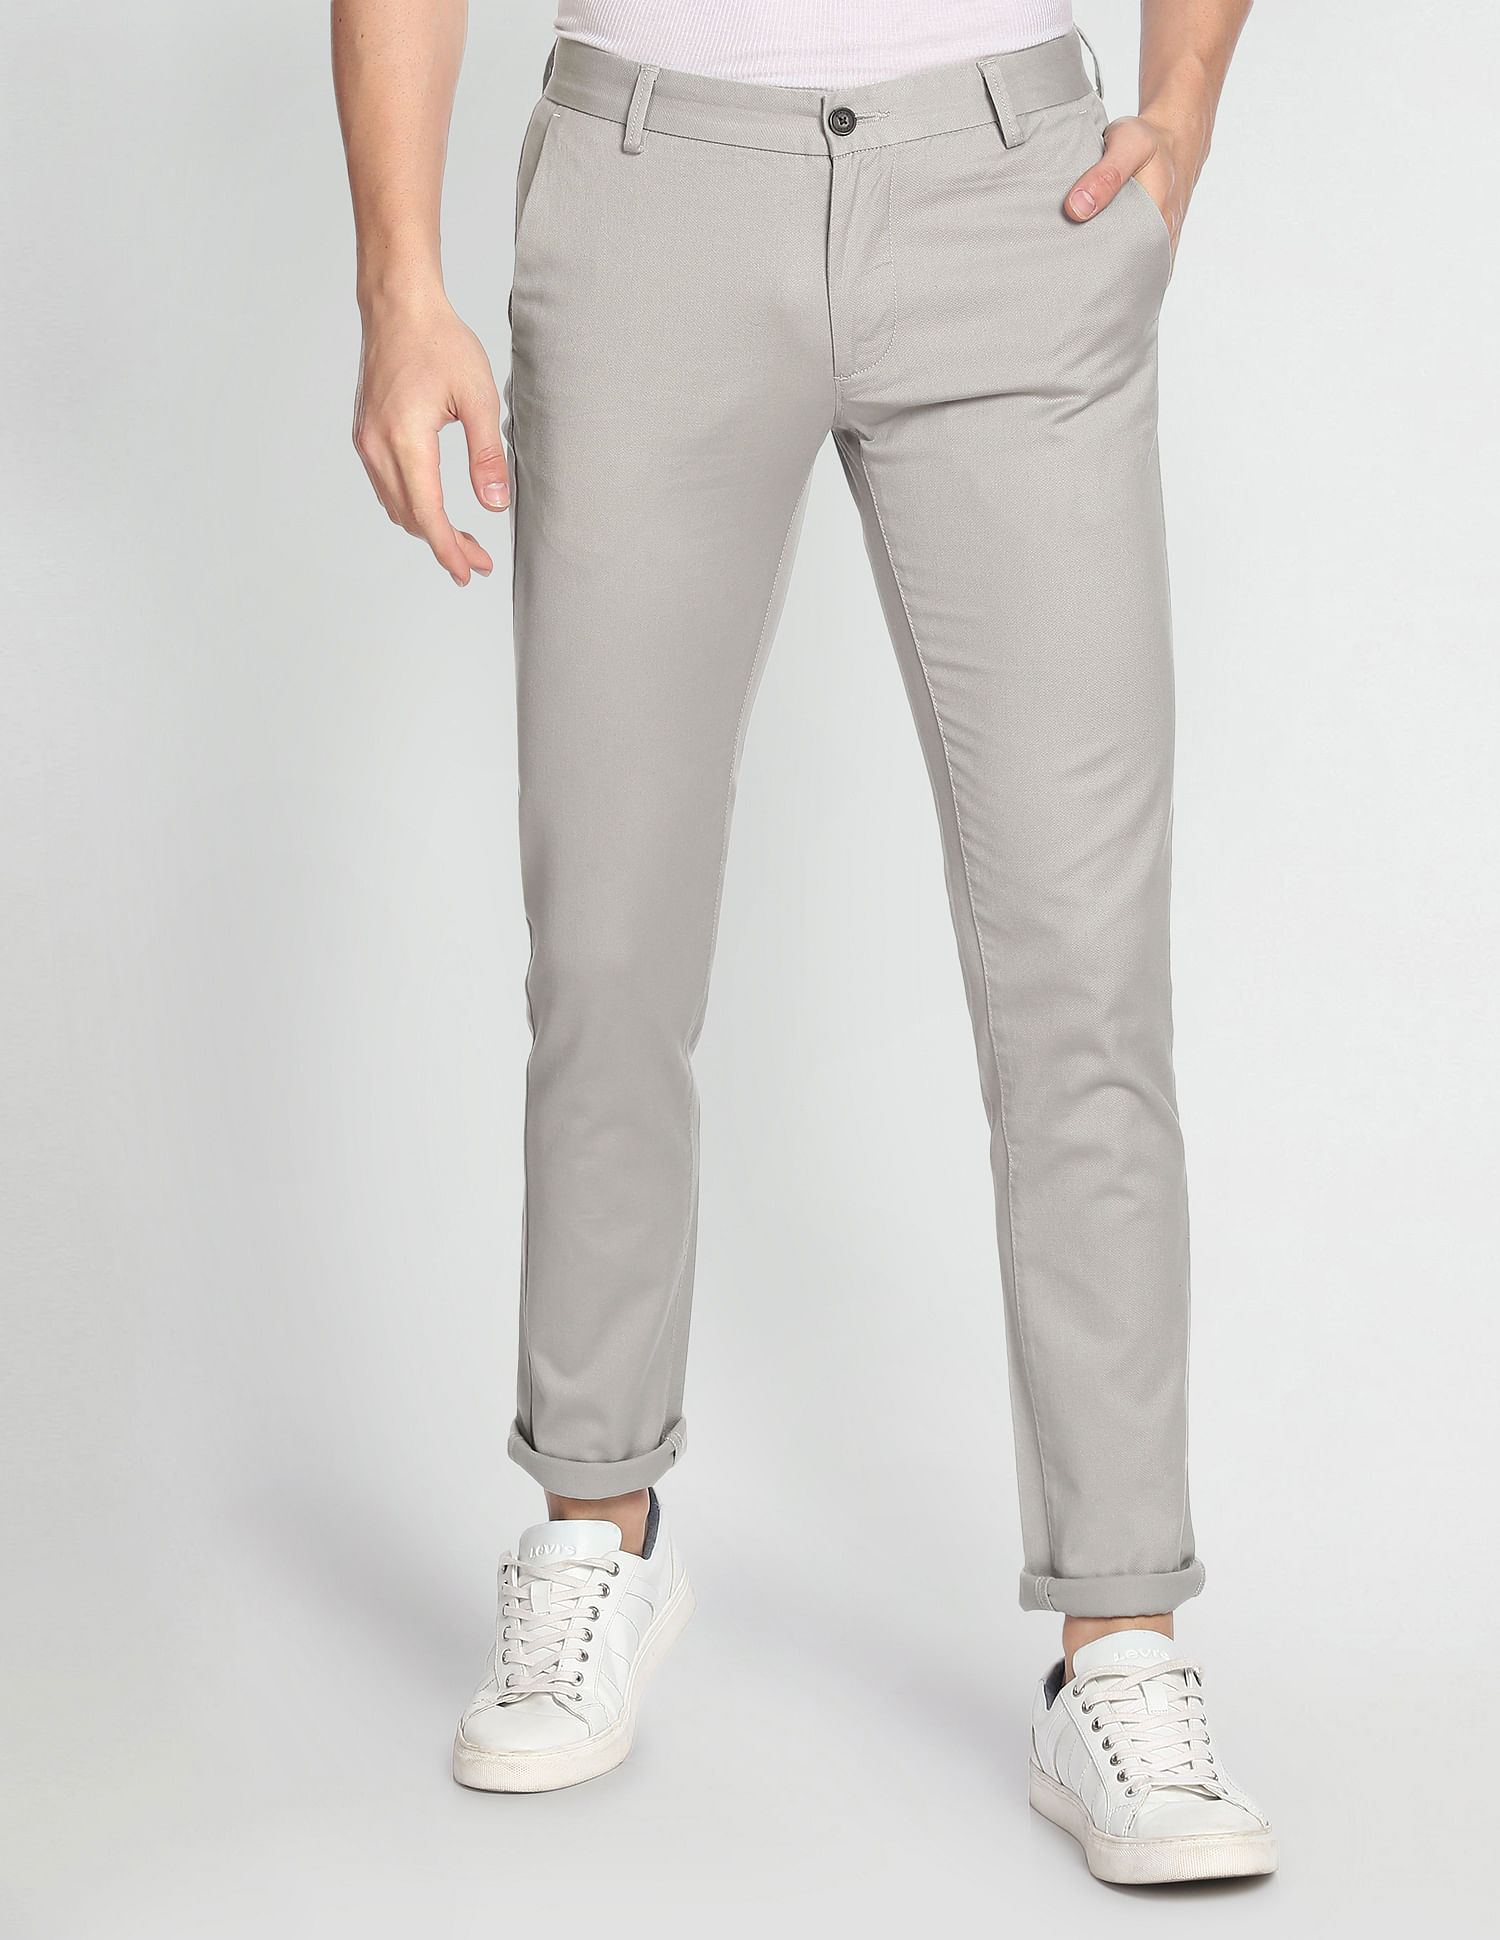 Buy Arrow Mid Rise Heathered Formal Trousers - NNNOW.com